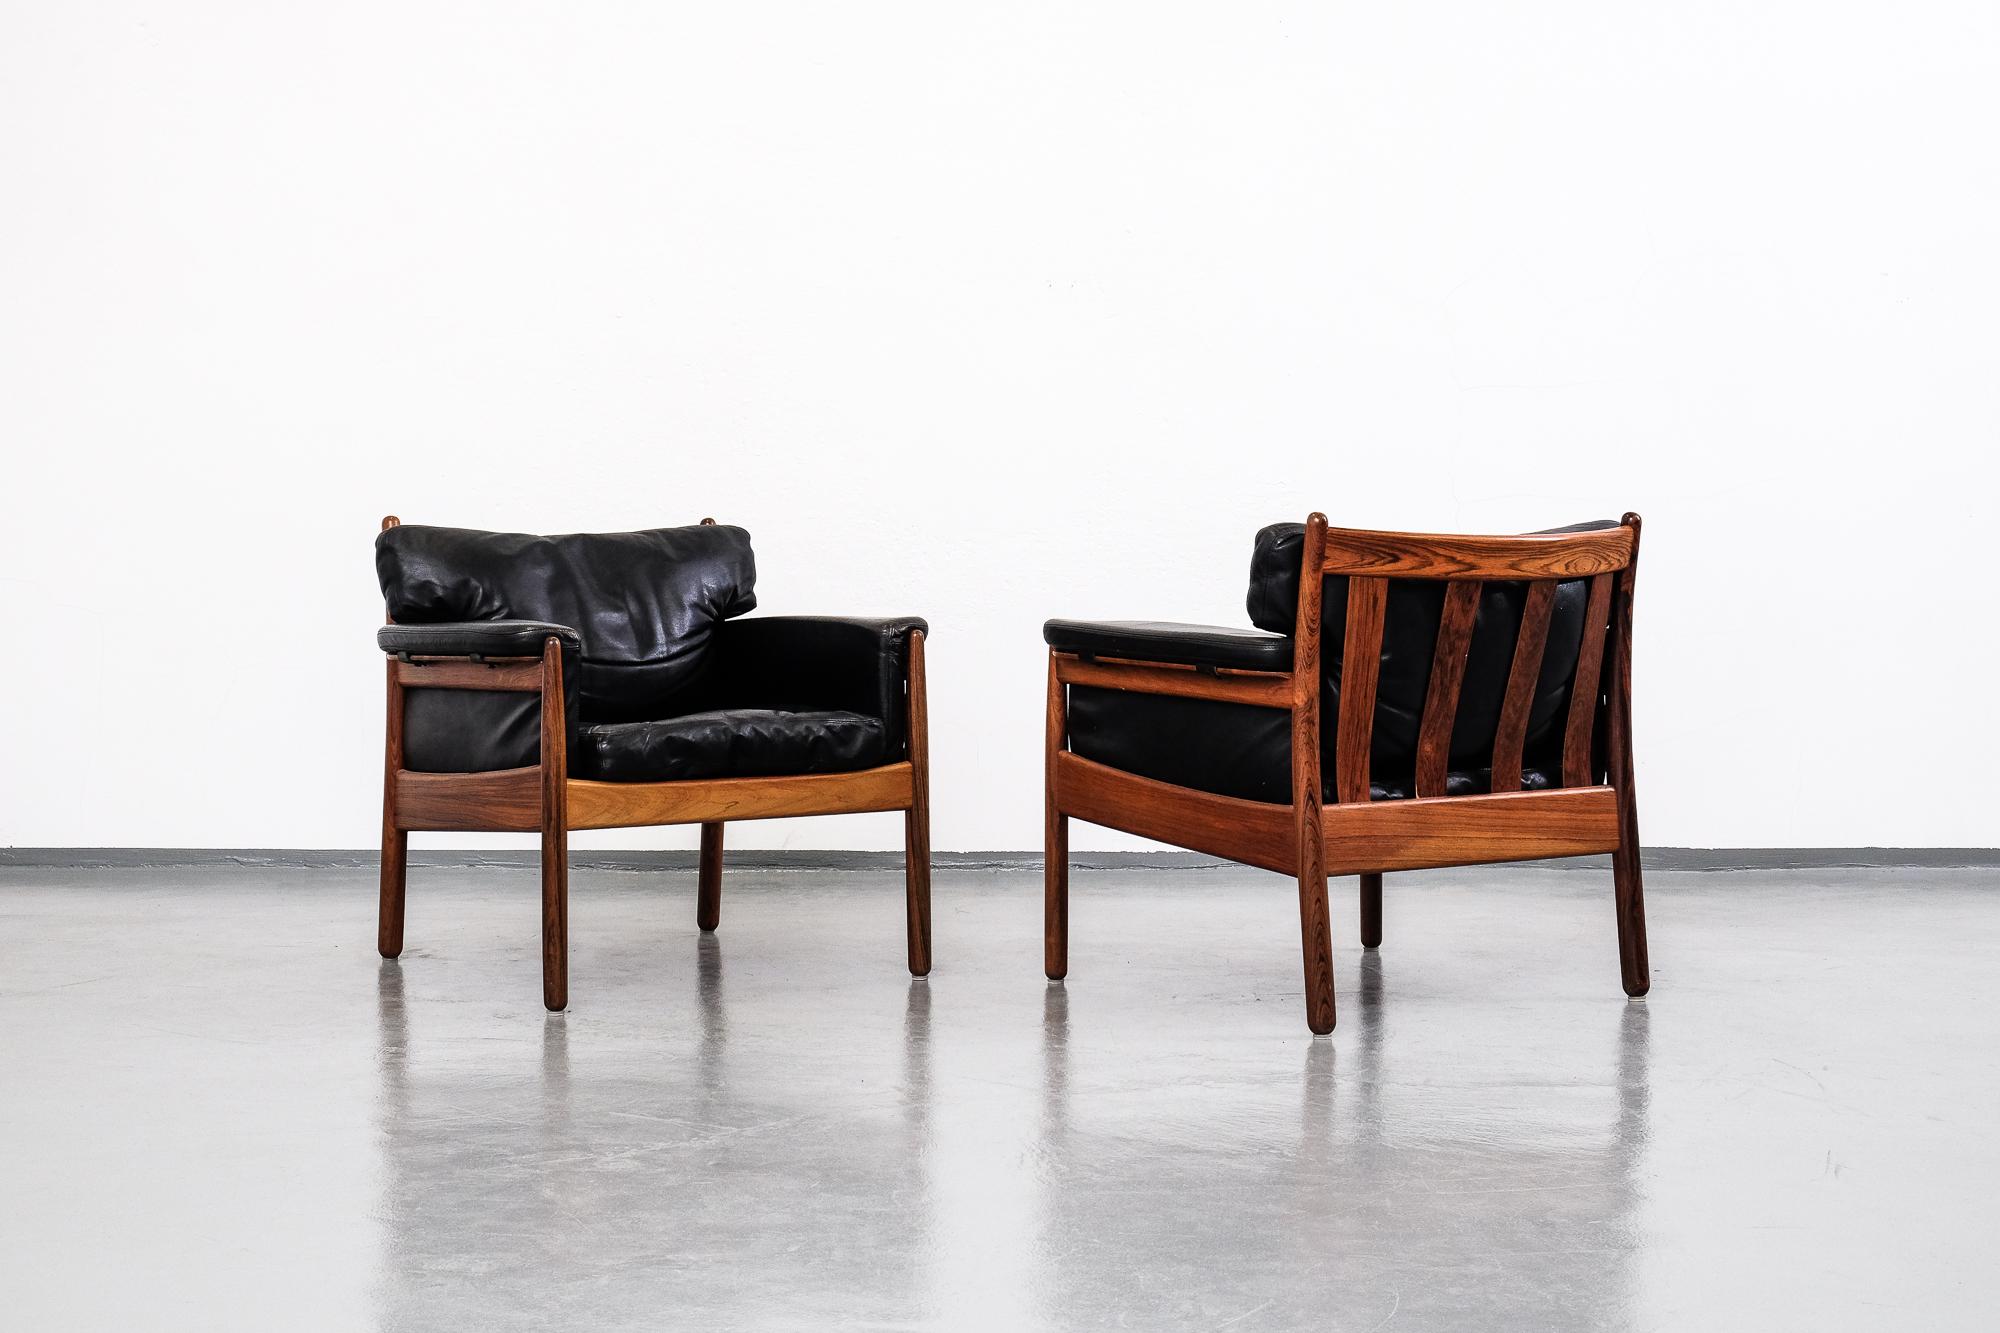 Pair of quality easy chairs designed by Swedish architect Gunnar Myrstrand (1925-1997) for Källemo, 1960s. Black leather and rosewood frame.